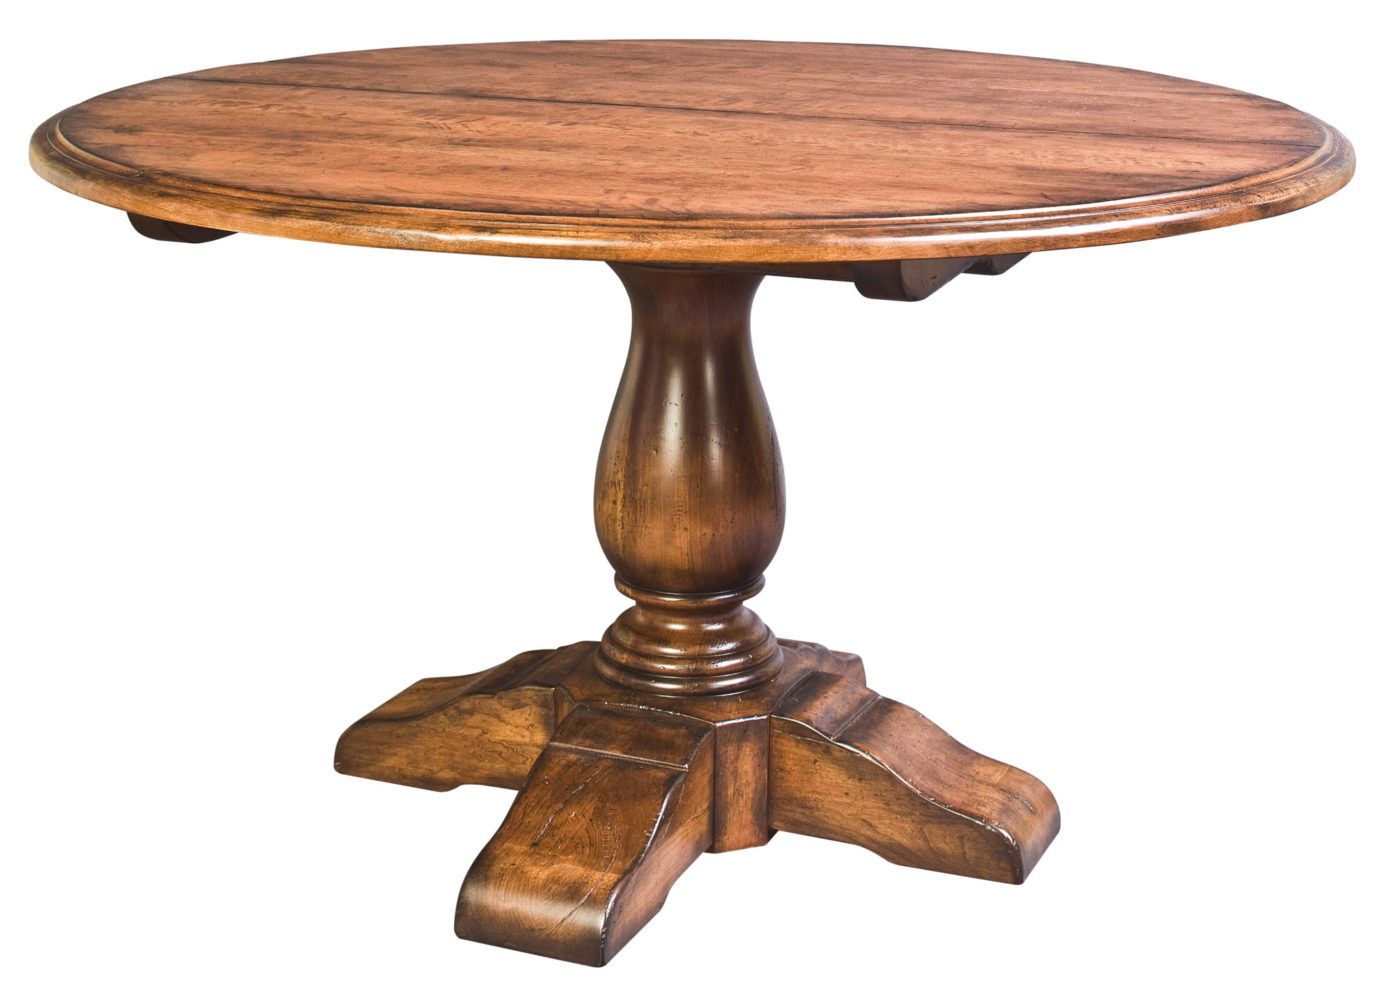 Vase Single Pedestal Table | Martin'S Furniture Within 2018 Gaspard Extendable Maple Solid Wood Pedestal Dining Tables (View 10 of 15)